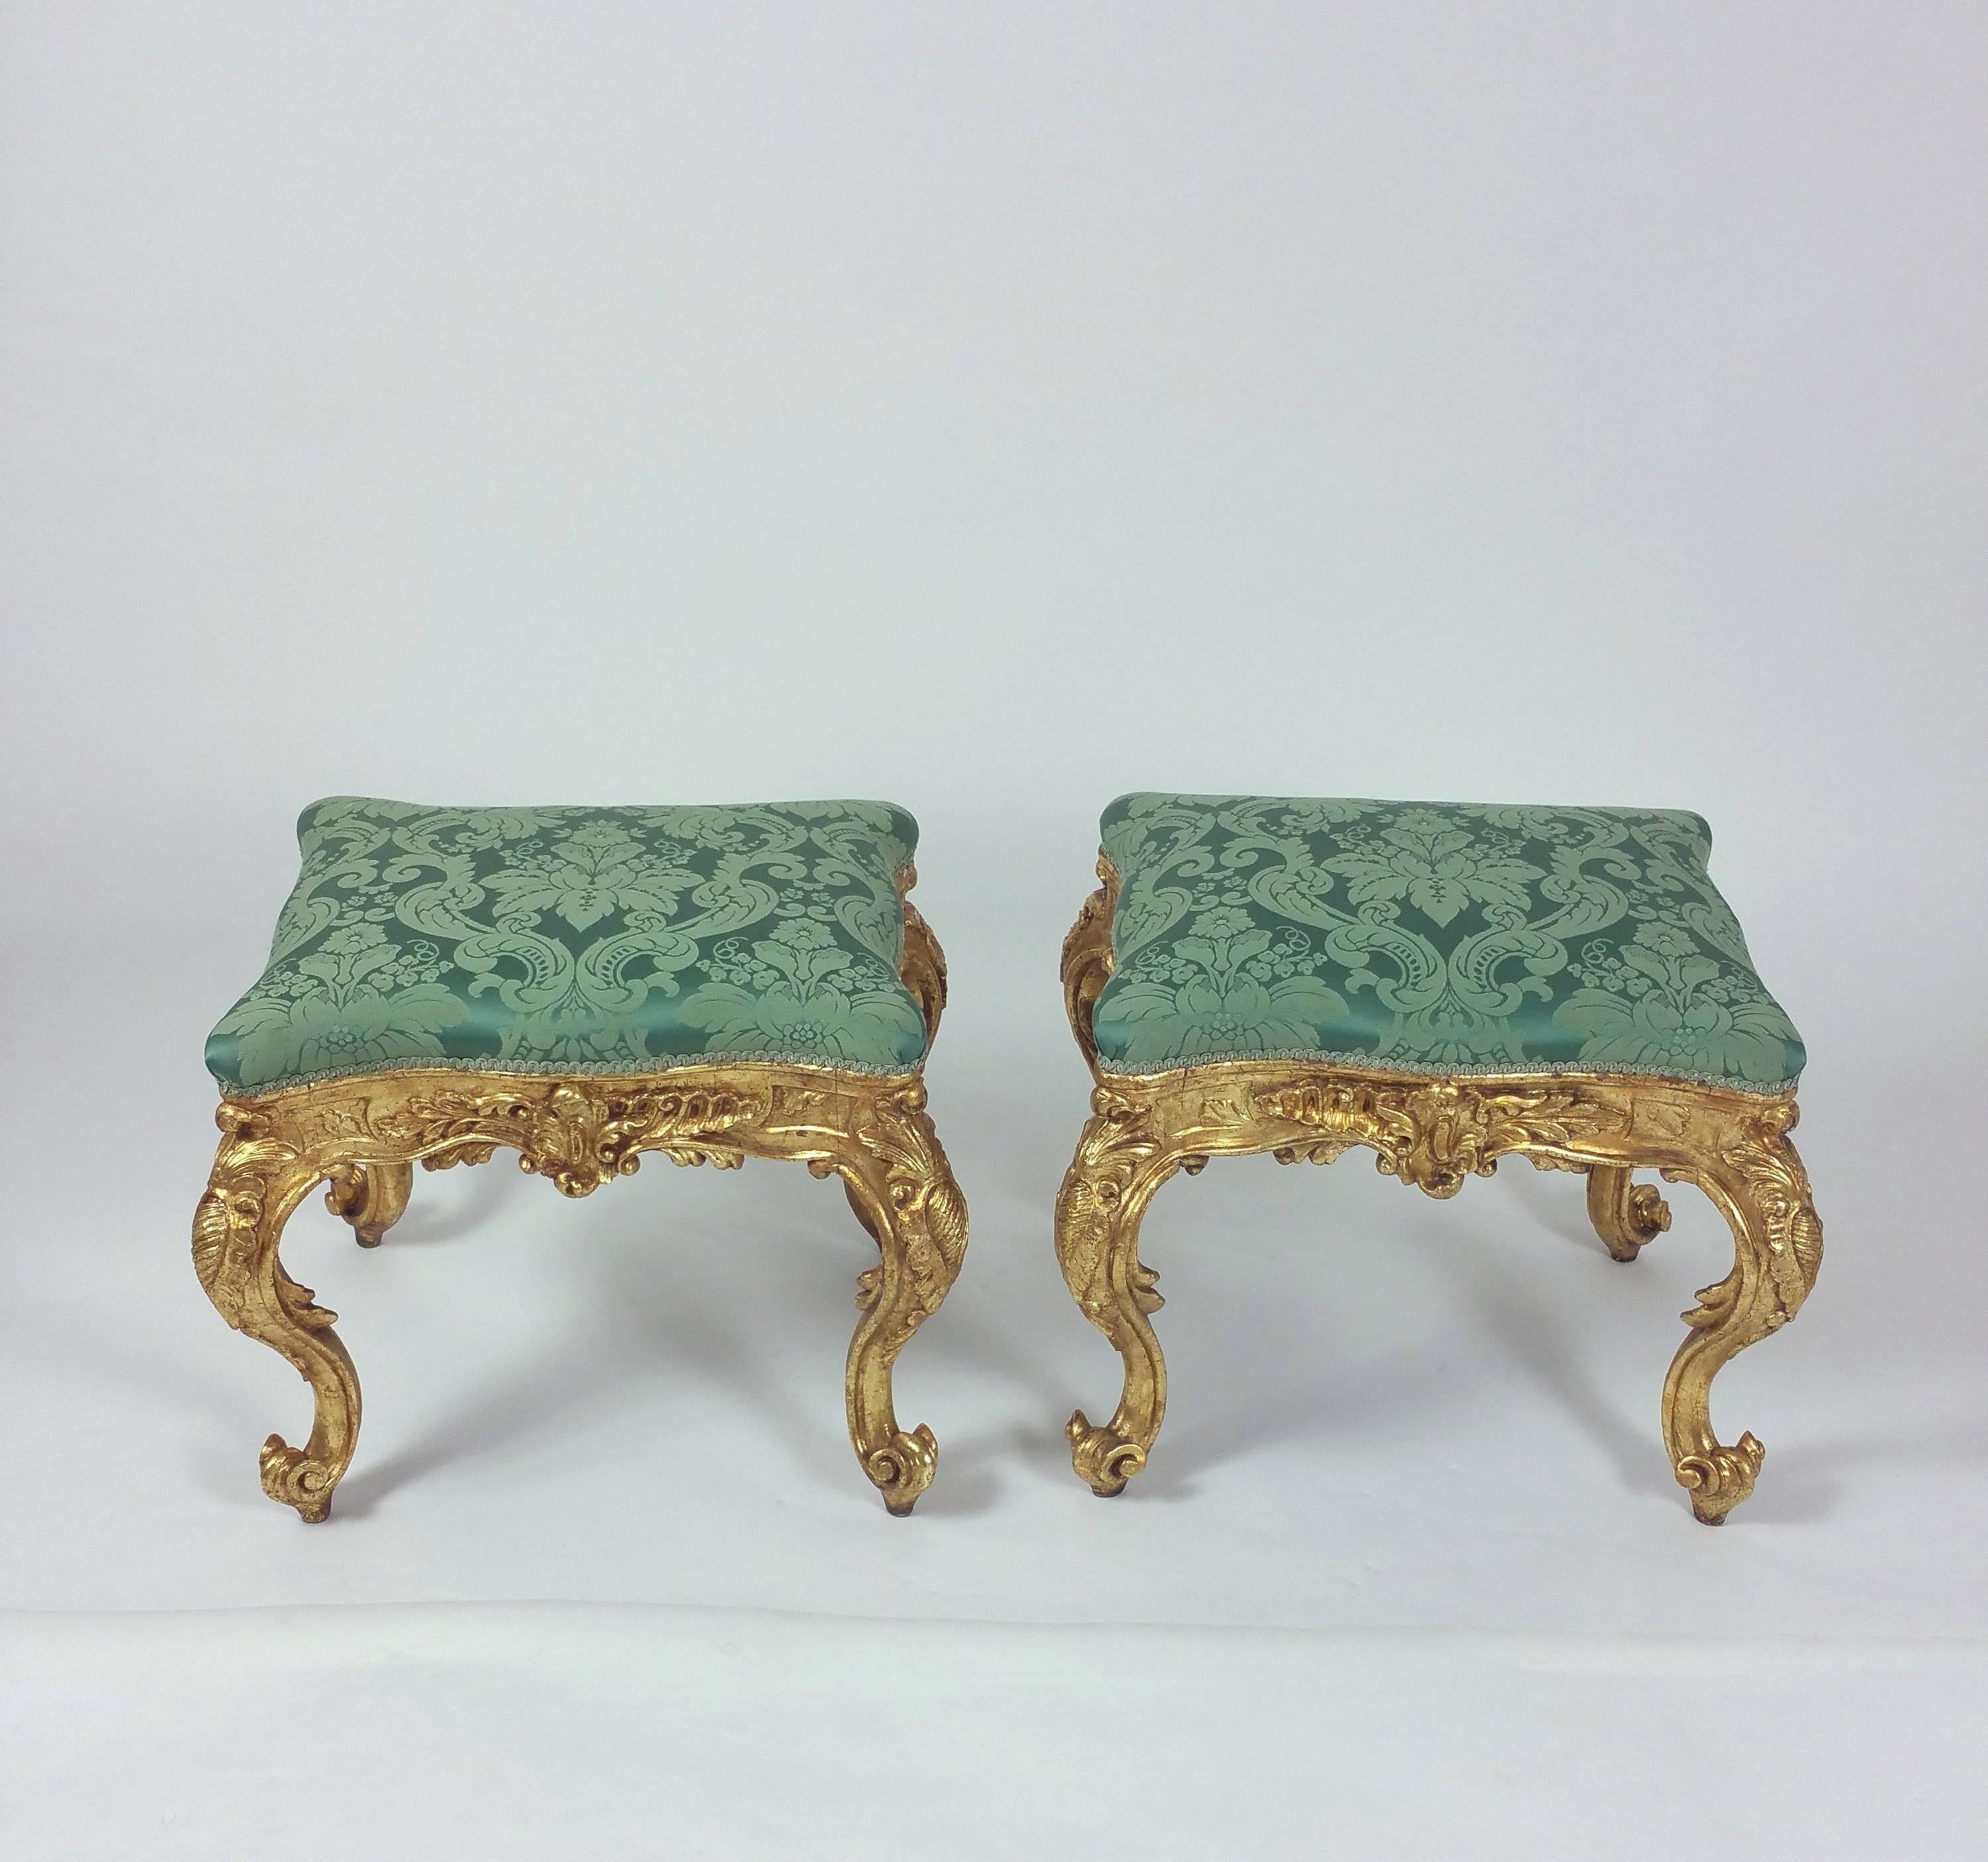 These elegant and fine French ornately carved giltwood stools are serpentine in form. They feature cabriole legs on scroll feet decorated with scrolls and acanthus leaves, and are upholstered in a green damask fabric. Each stool measures 24 in – 61